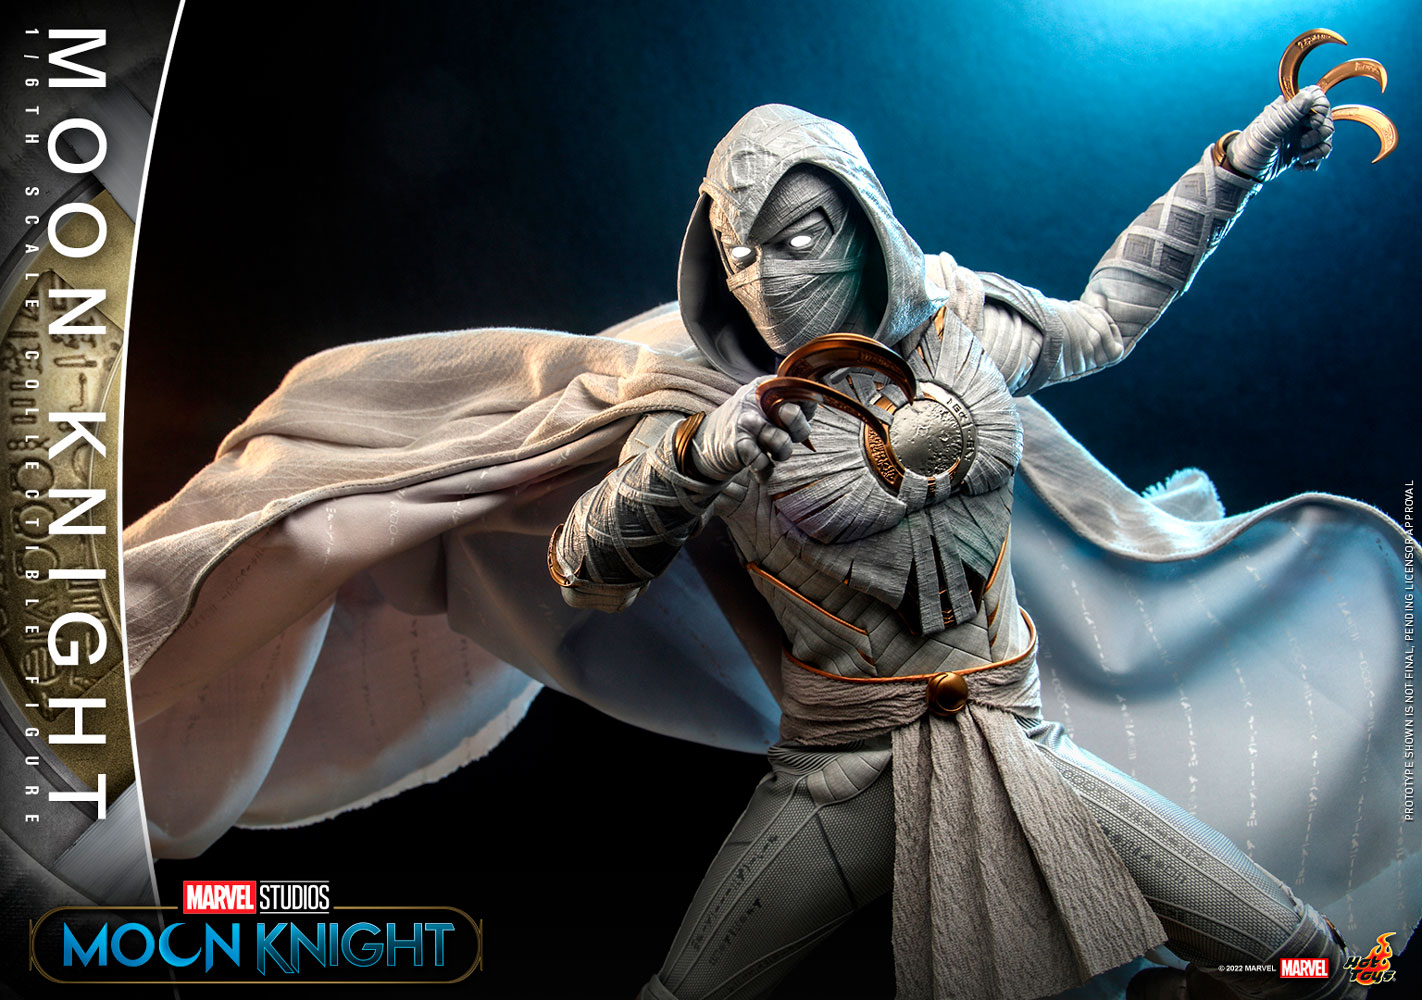 Moon Knight Sixth Scale Figure by Hot Toys Television Masterpiece Series - Moon Knight